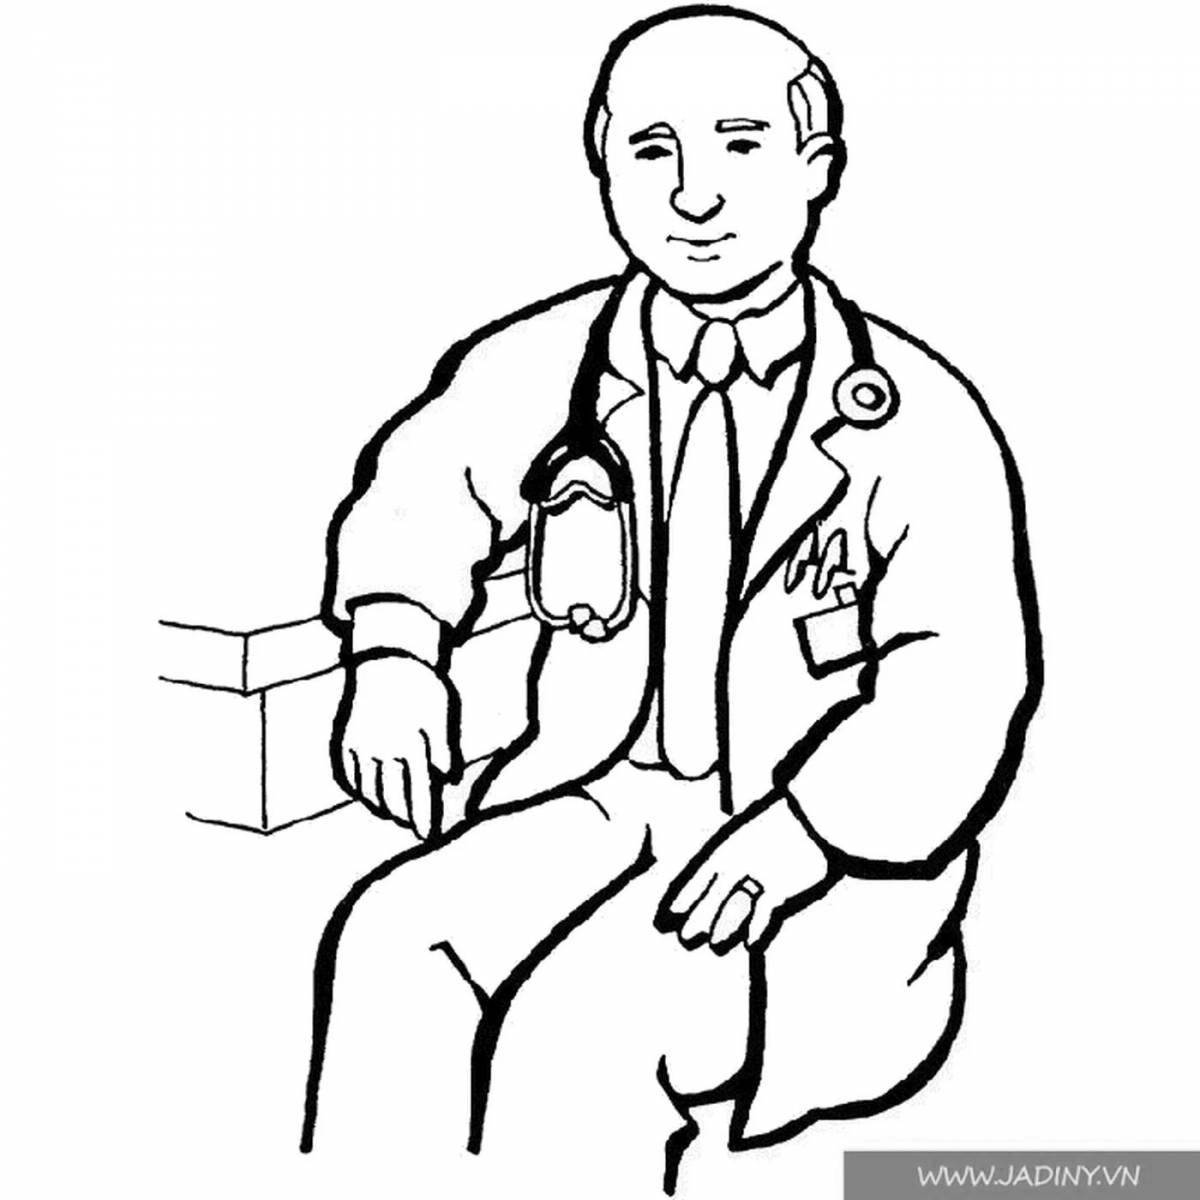 Fabulous surgeon coloring book for kids